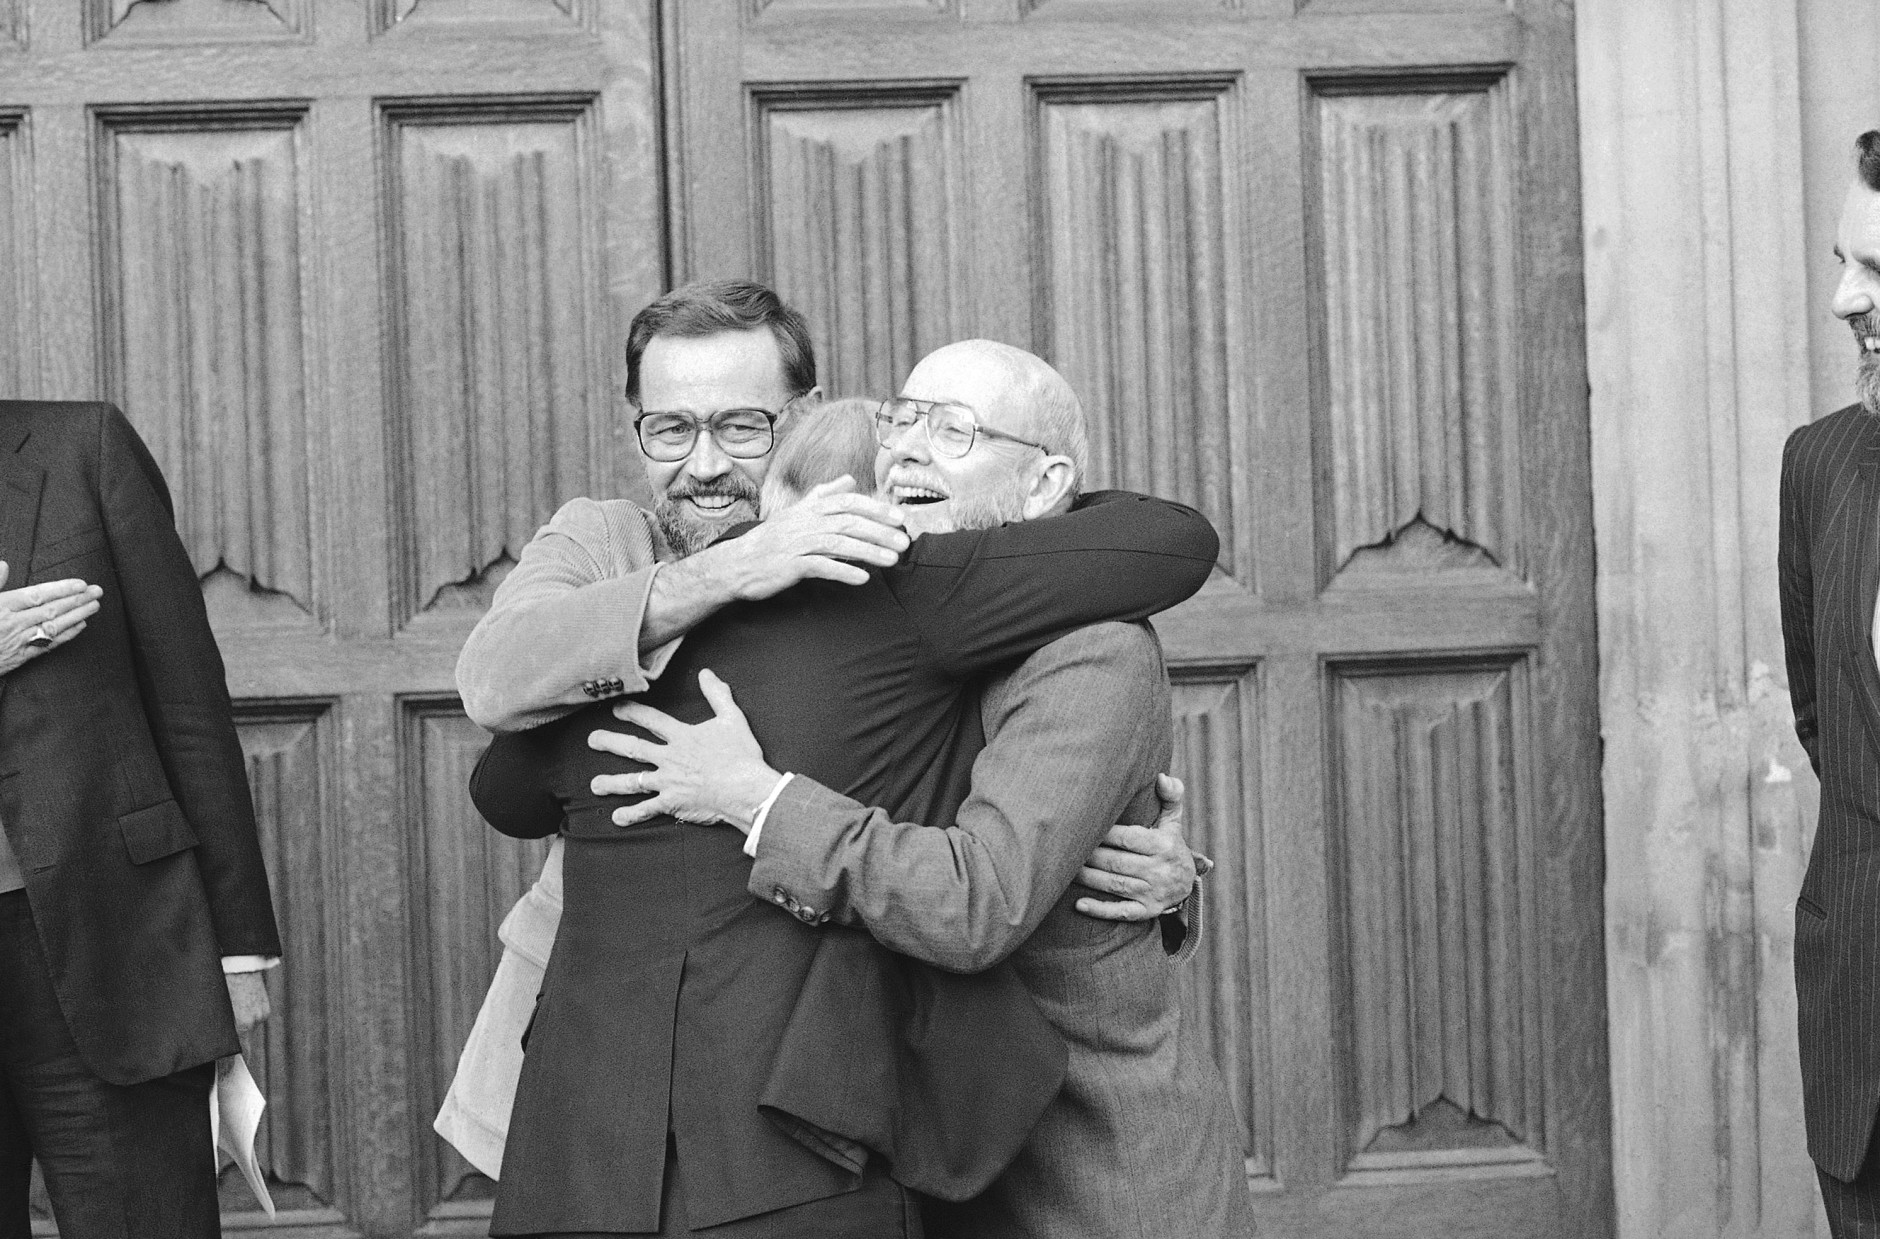 On this date in 1985, Shiite Muslim kidnappers in Lebanon released the Rev. Benjamin Weir after holding him captive for 16 months. Here, Weir is seen on the right, with David Jacobsen (left) and Rev. Lawrence Martin Jenco.  (AP Photo/Gerald Penny)